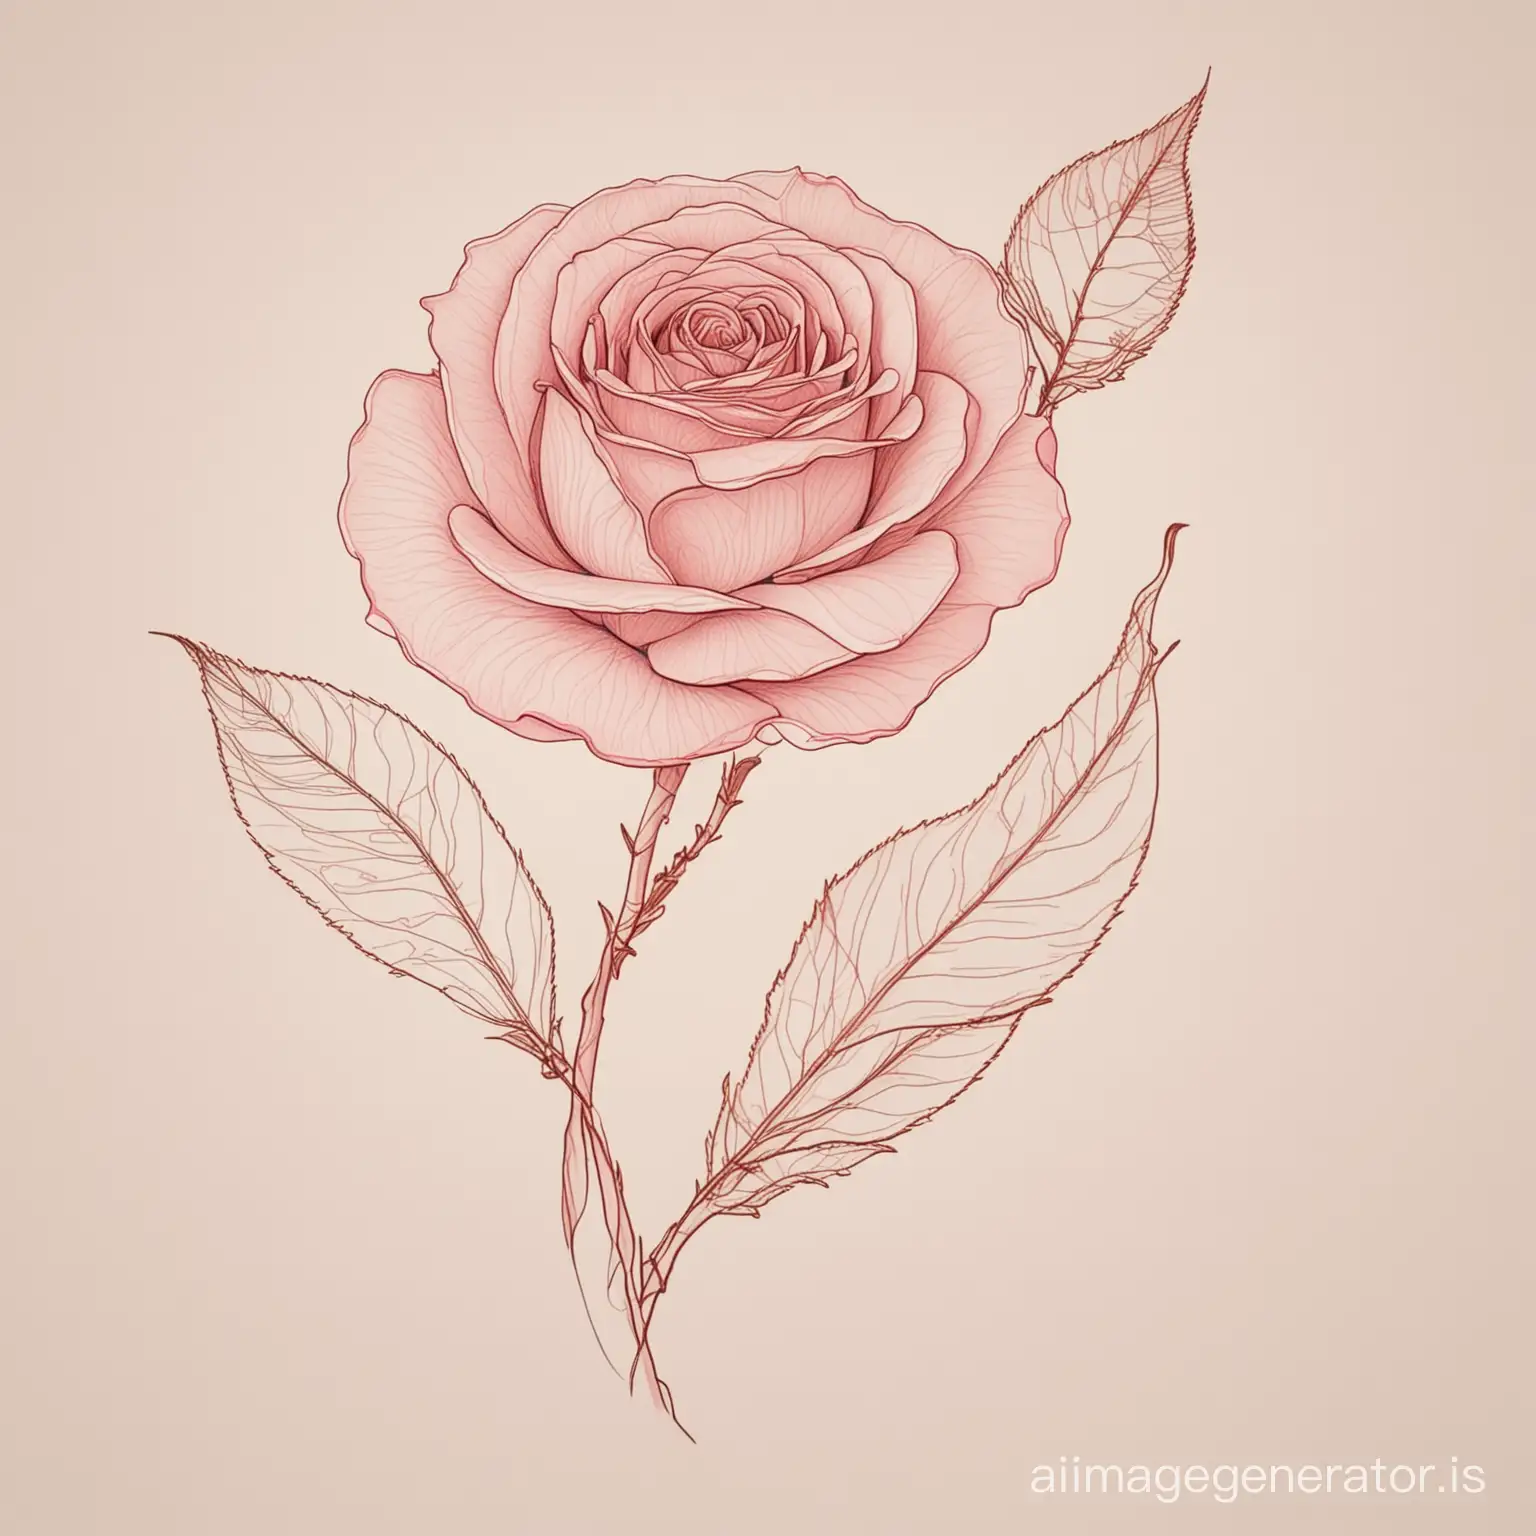 pink rose petals, aesthetics of the female body, curves, skin imperfections, perfection, golden ratio

dark botanic illustration, one thin continuous line drawing, doodle, white background